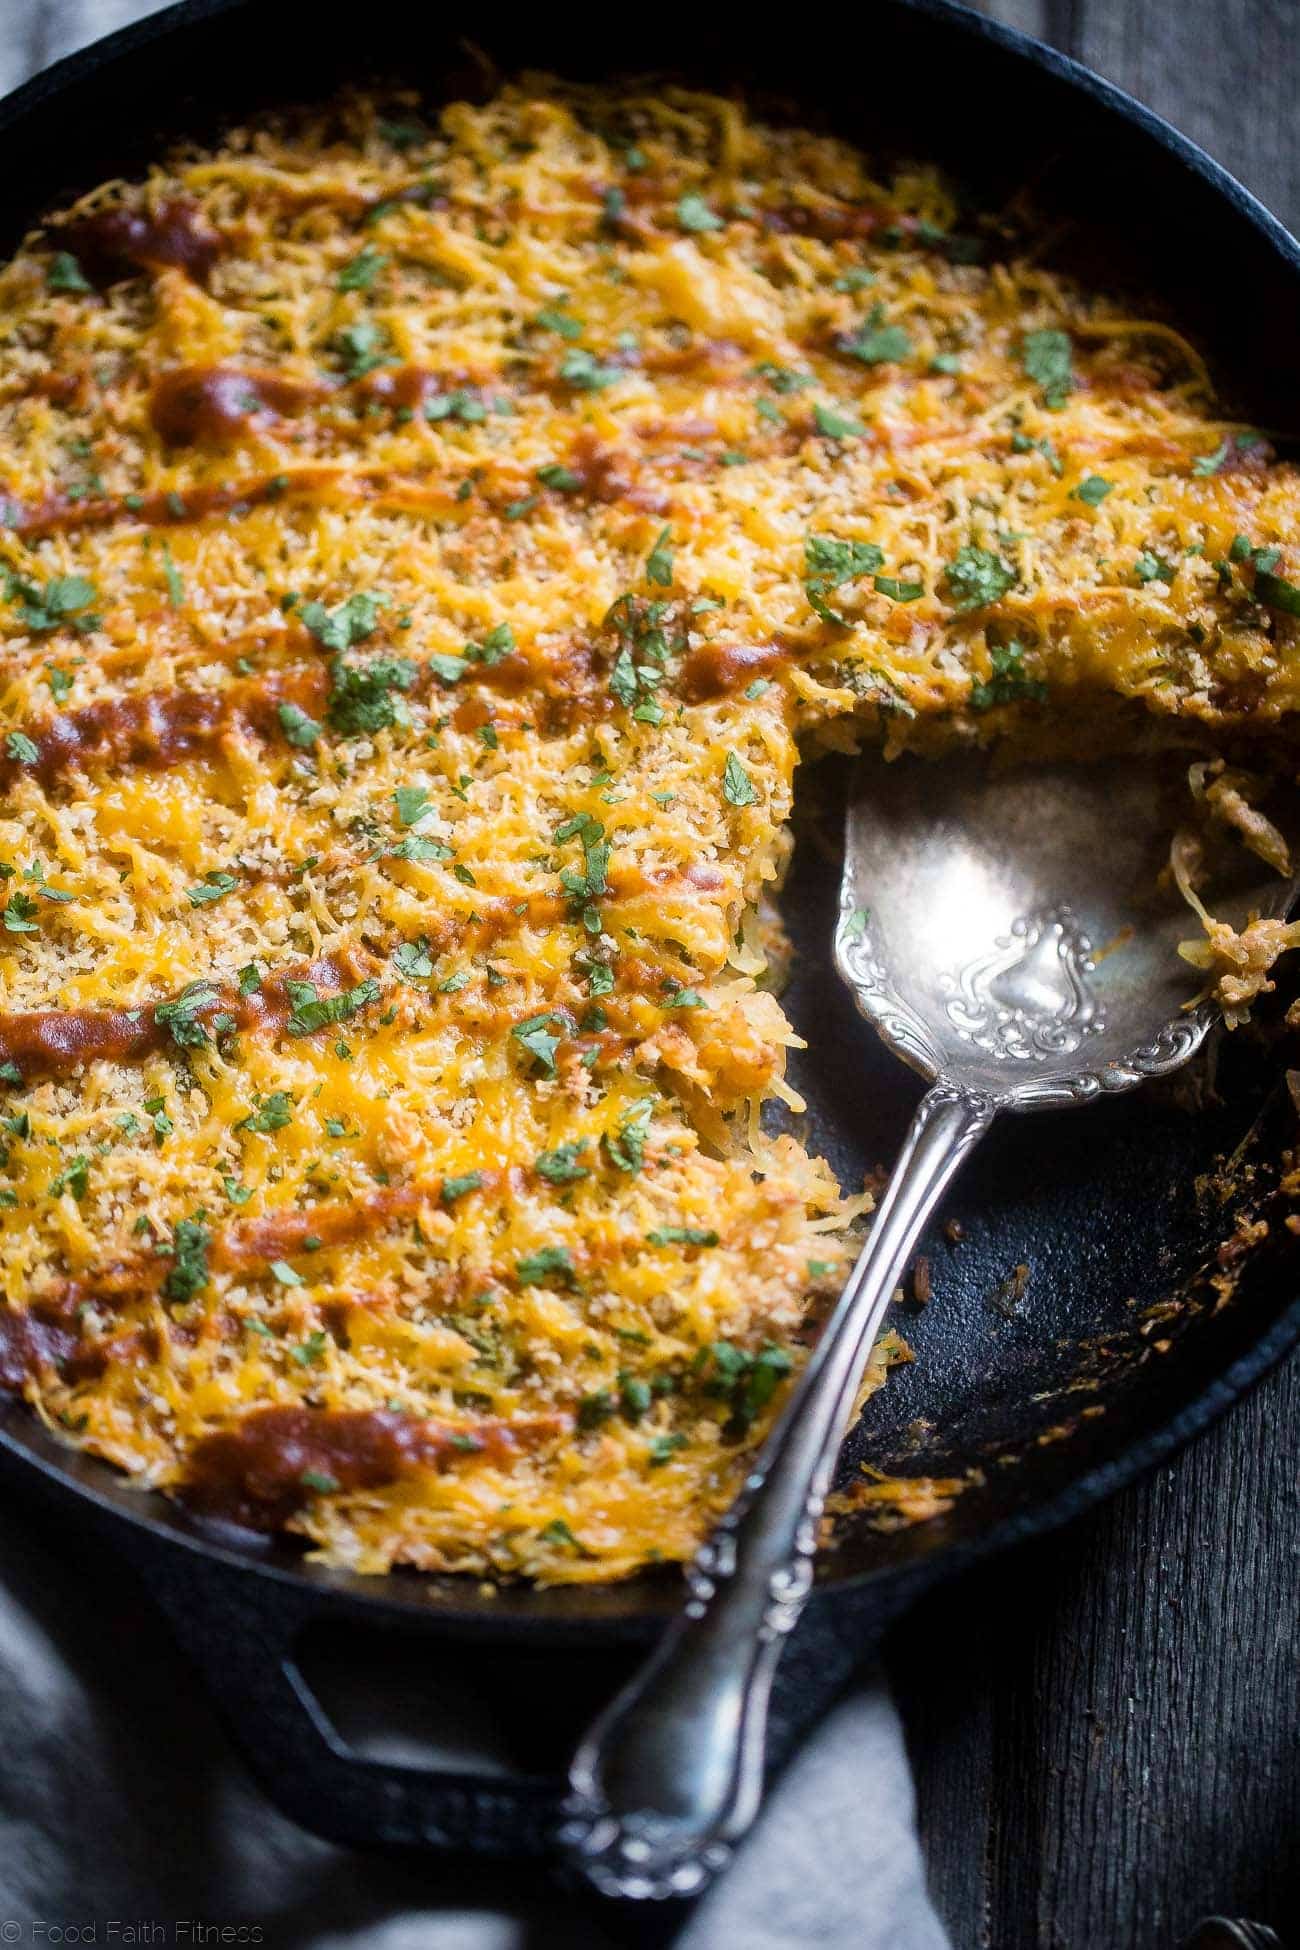 BBQ Baked Chicken Spaghetti Squash Casserole - This low carb, gluten free chicken spaghetti squash casserole is cheesy, flavorful and only 214 calories! It's a kid-friendly, weeknight meal that the whole family will love! | Foodfaithfitness.com | @FoodfaithFit